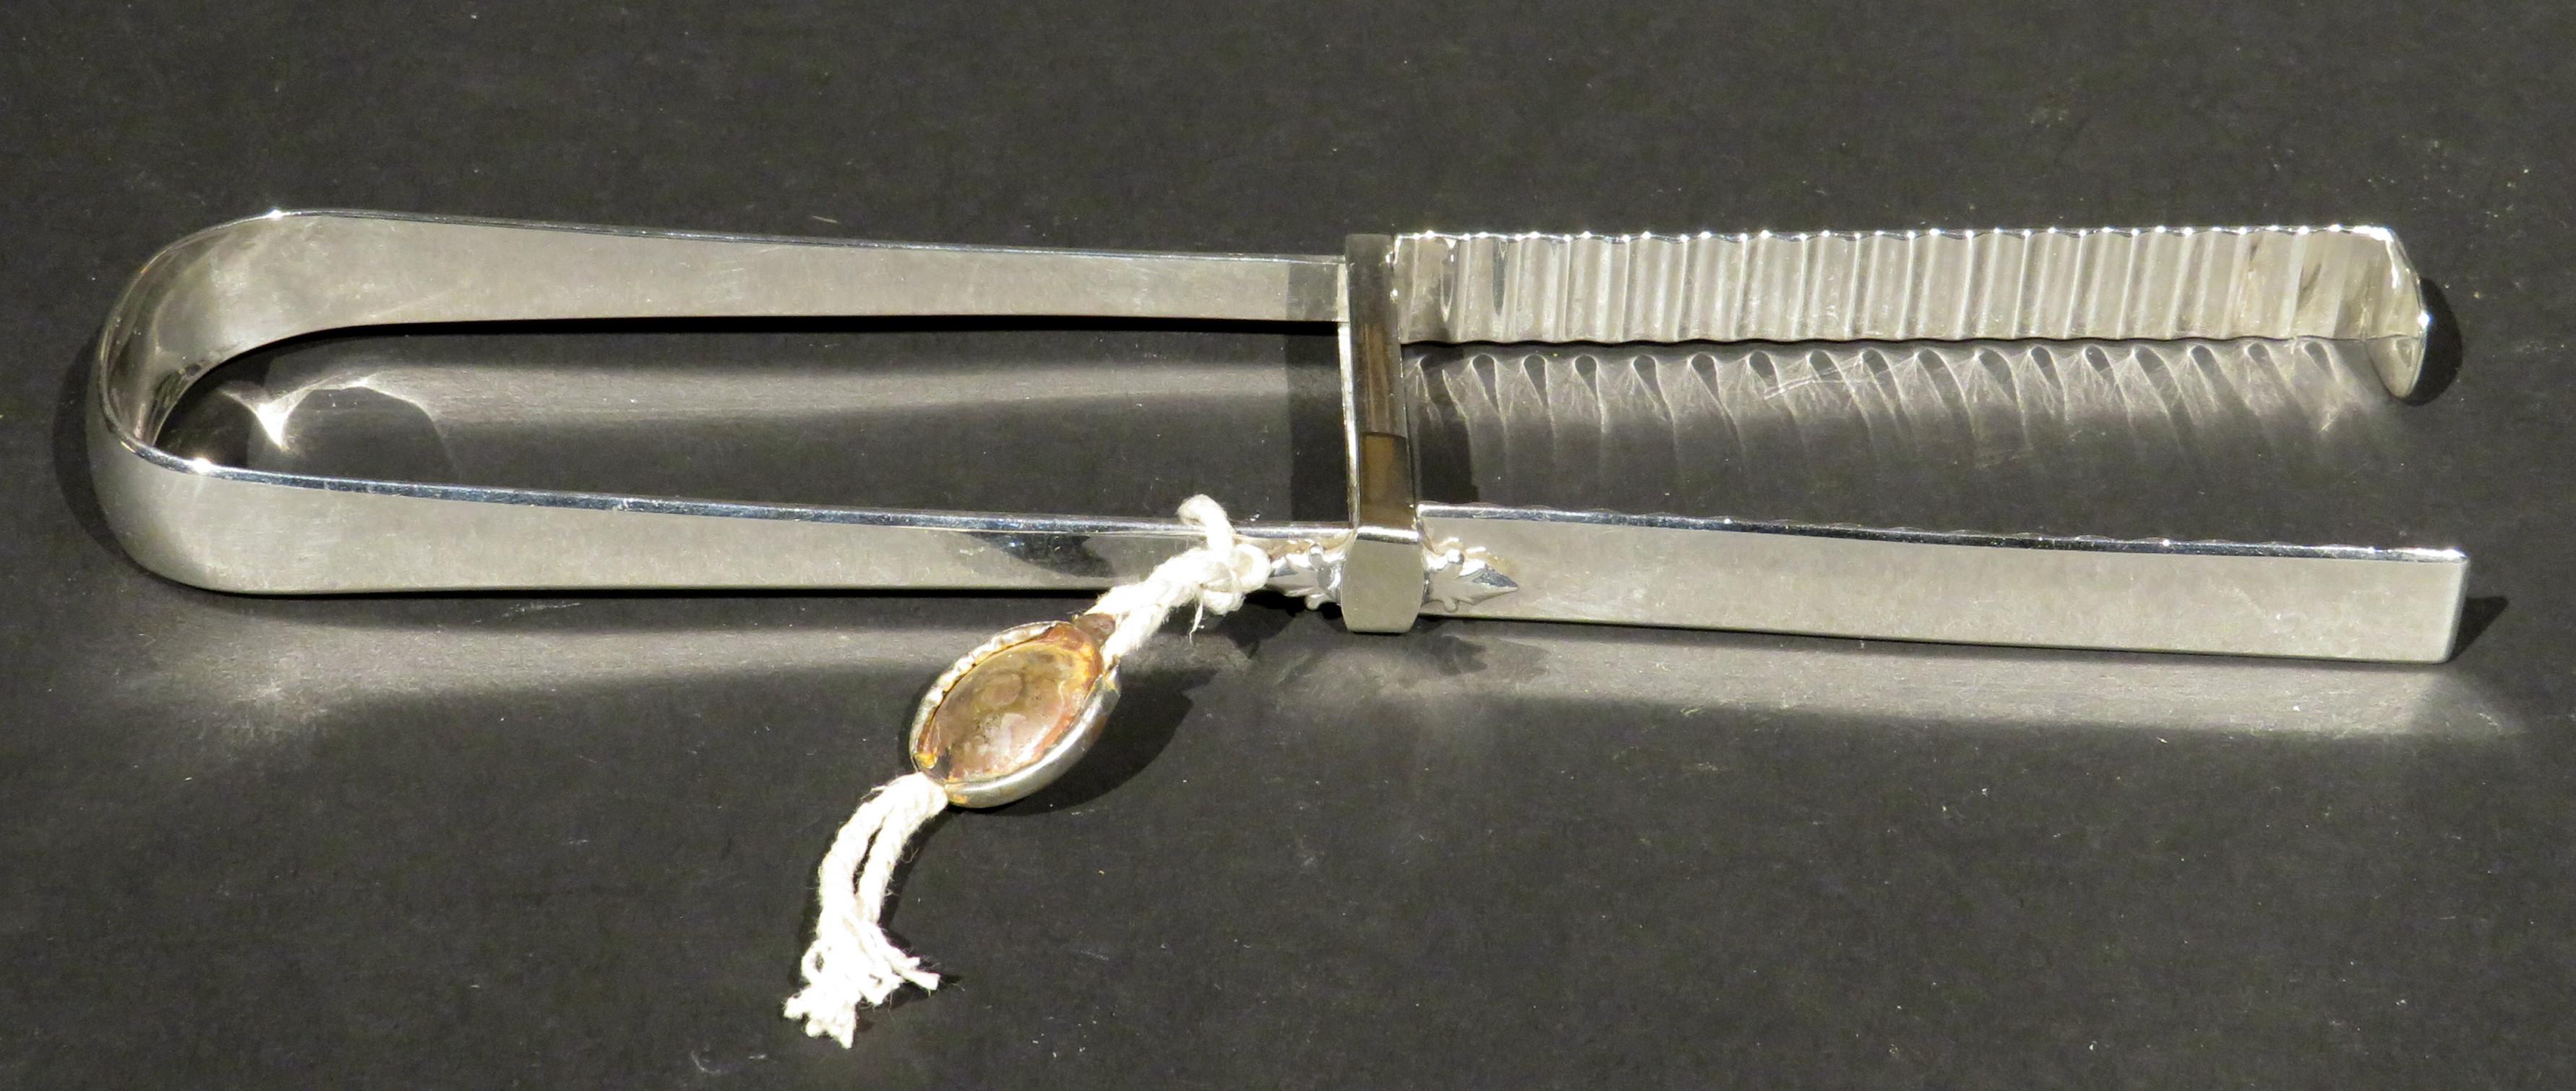 This fine and relatively rare pair of 18th century George III Period sterling silver asparagus tongs remains in fine overall condition, bearing London hallmarks and date marks for 1791, together with maker’s marks for Henry Chawner. The medallion